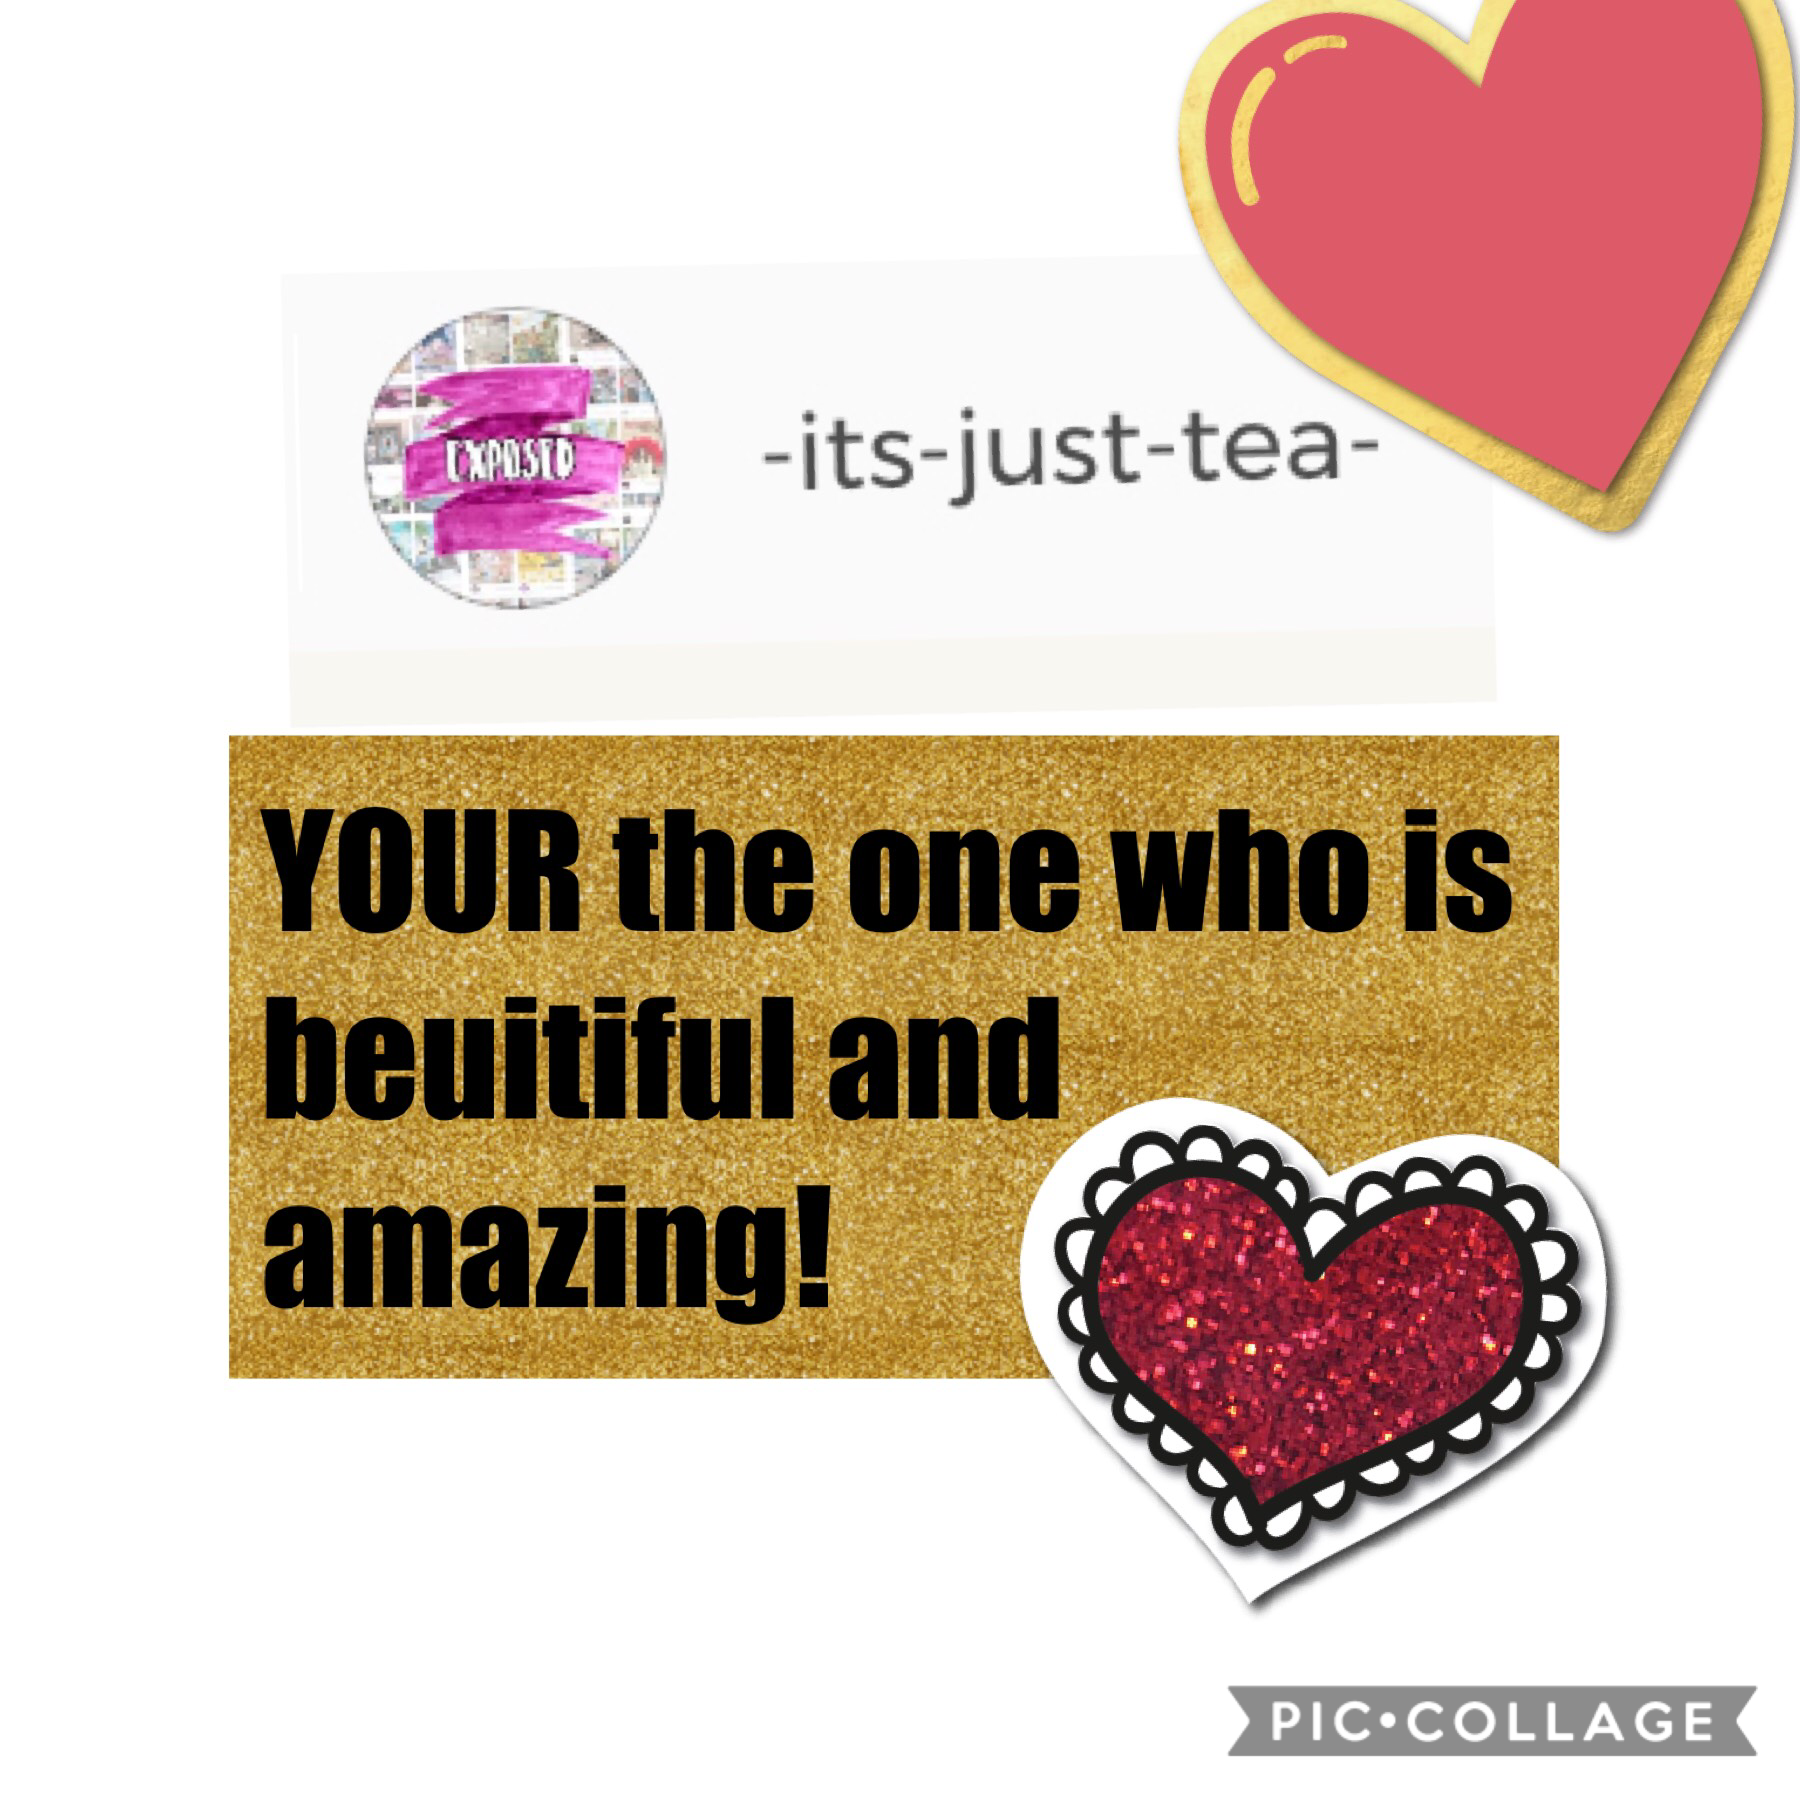 This collage is for its-just-tea! 